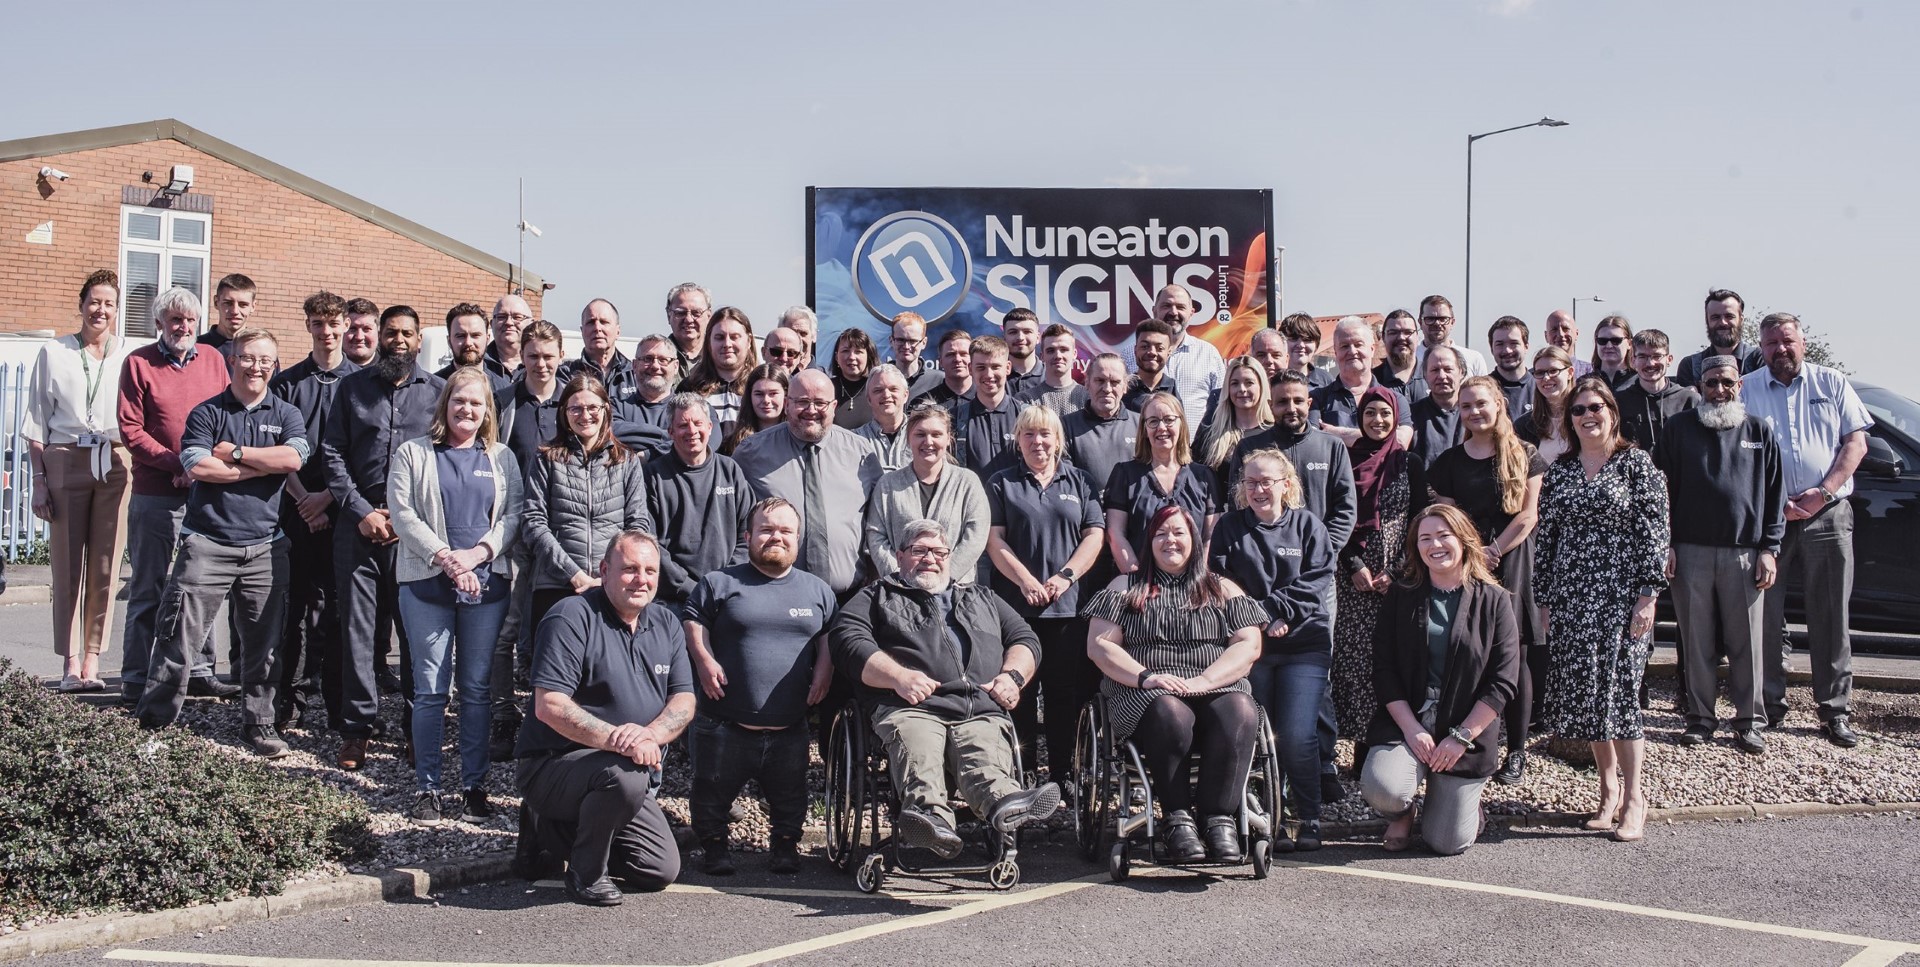 Inspirational Nuneaton Signs creating a workplace for everyone